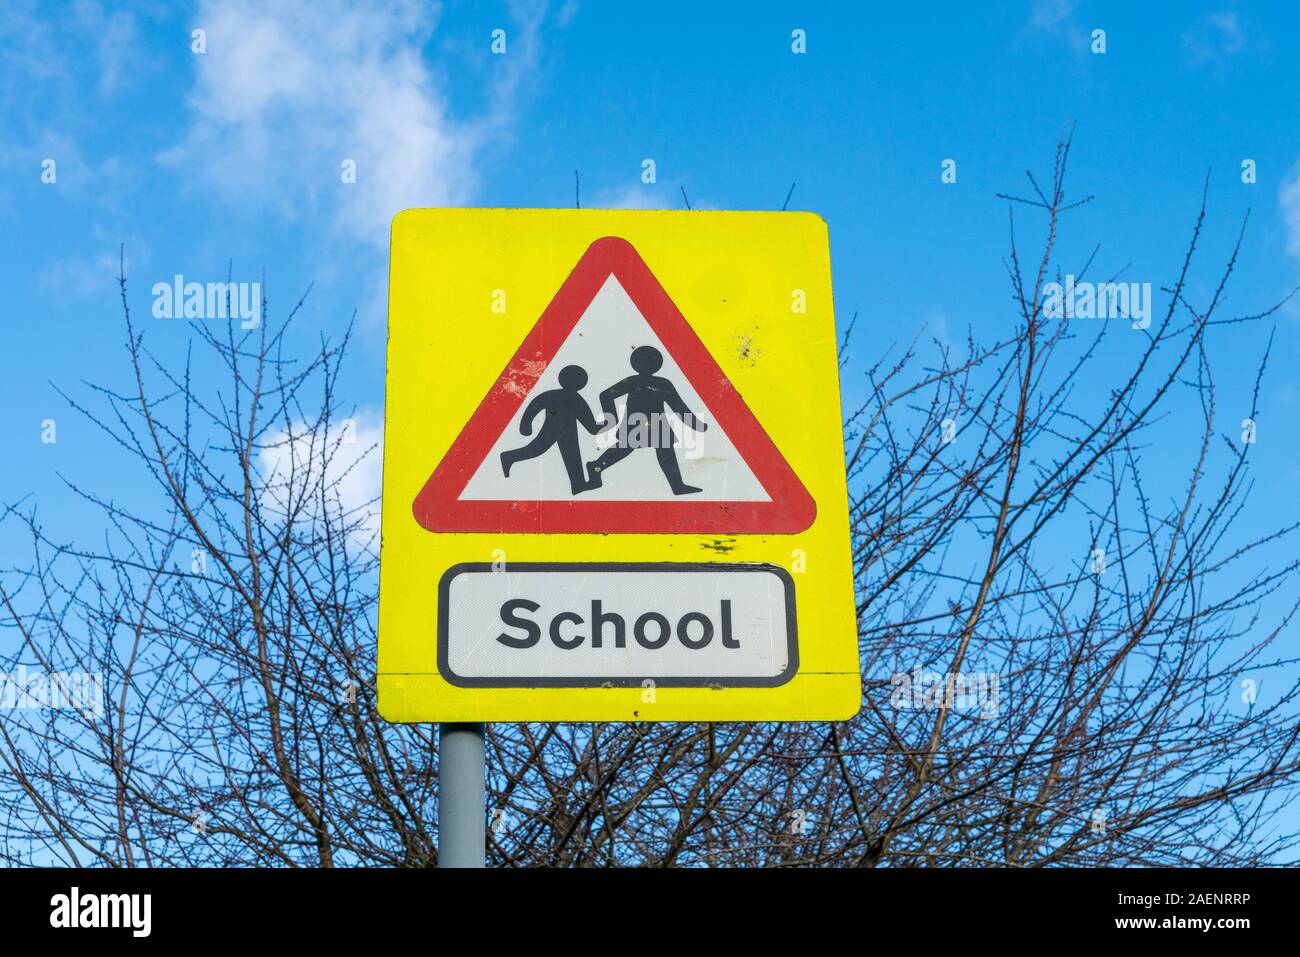 Red triangle road sign warning of school children Stock Photo